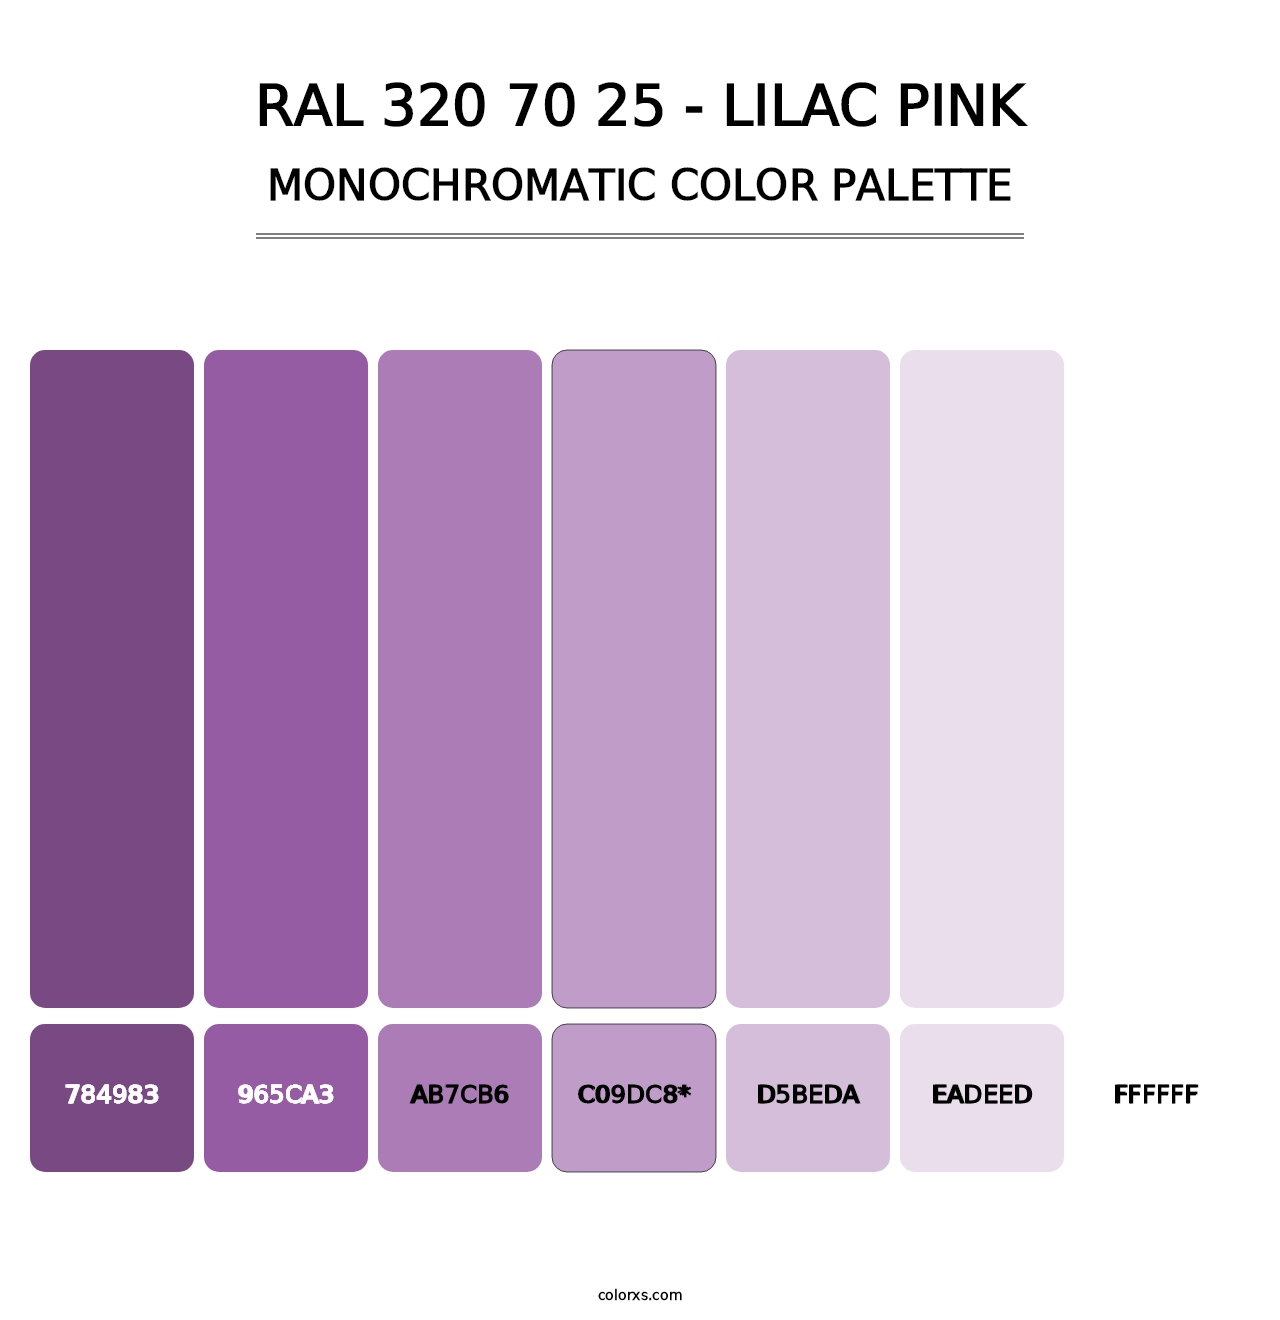 RAL 320 70 25 - Lilac Pink - Monochromatic Color Palette